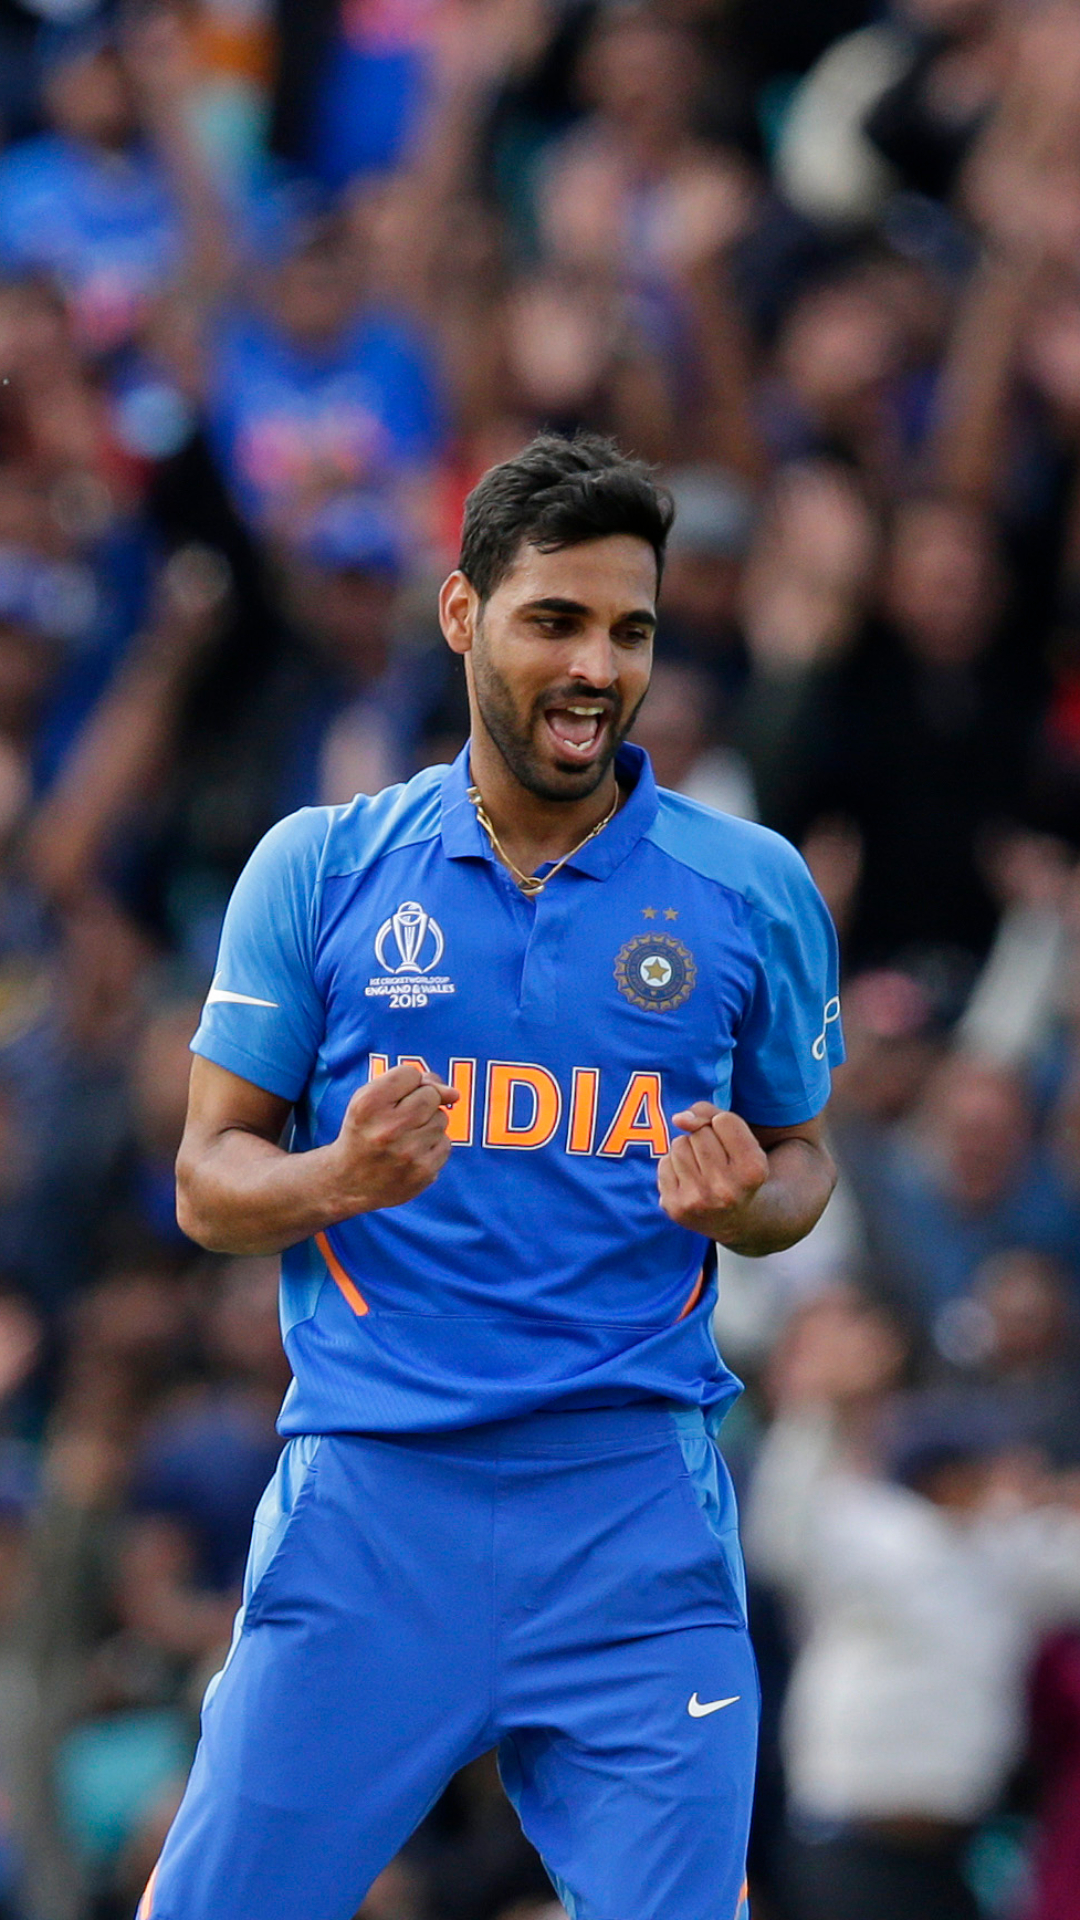 Here's a look at Bhuvneshwar Kumar's records and stats on his 33rd Birthday